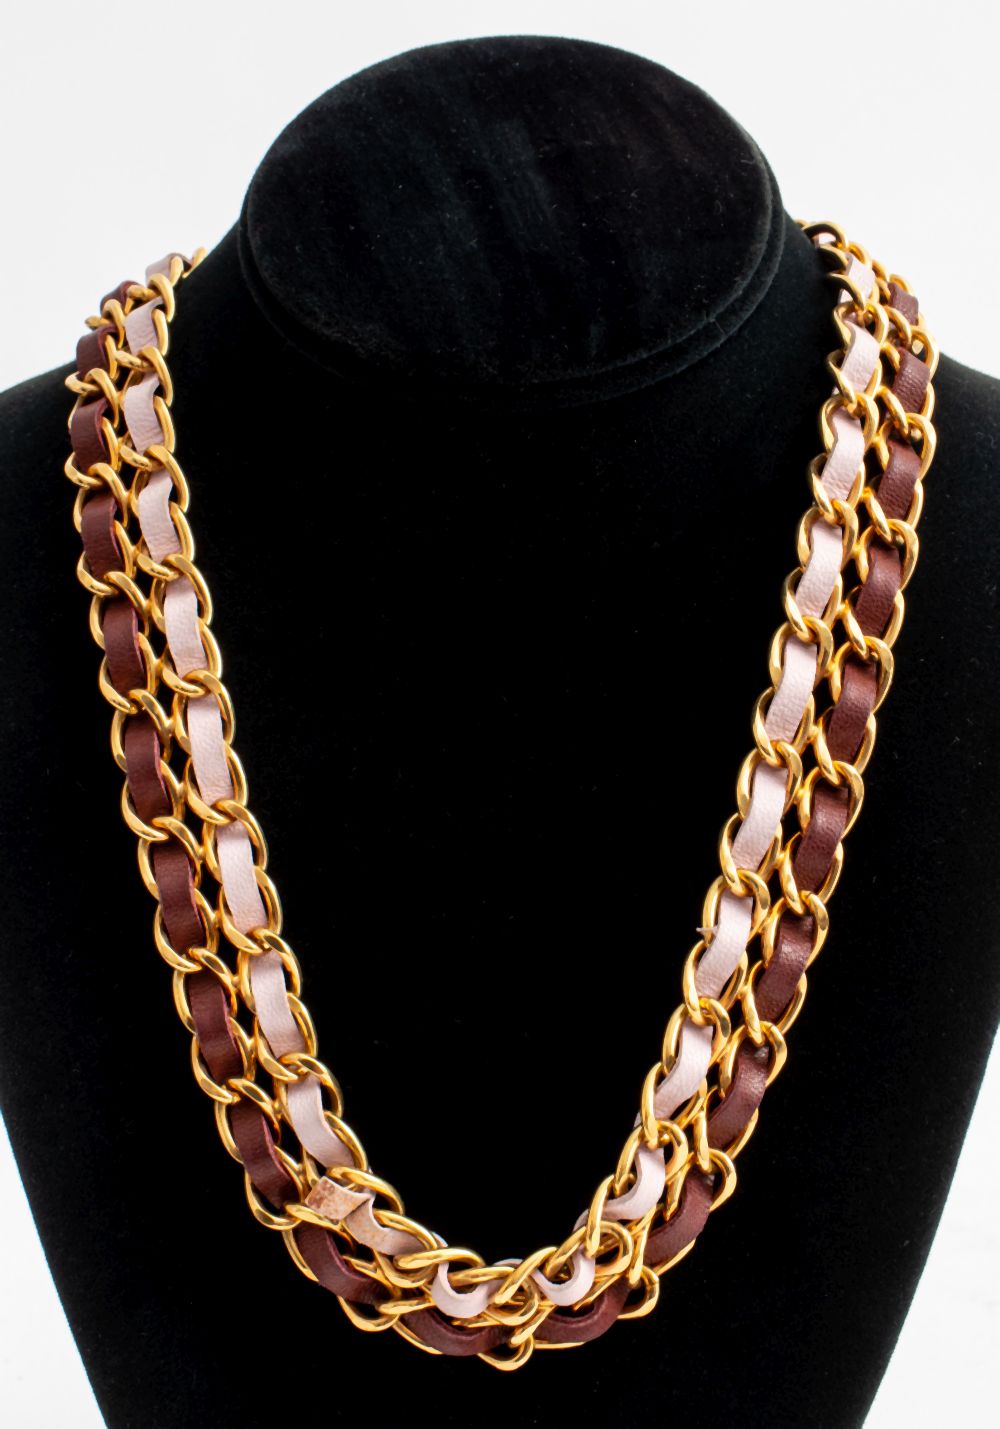 CHANEL CLOVER GOLD-TONE METAL CHAIN